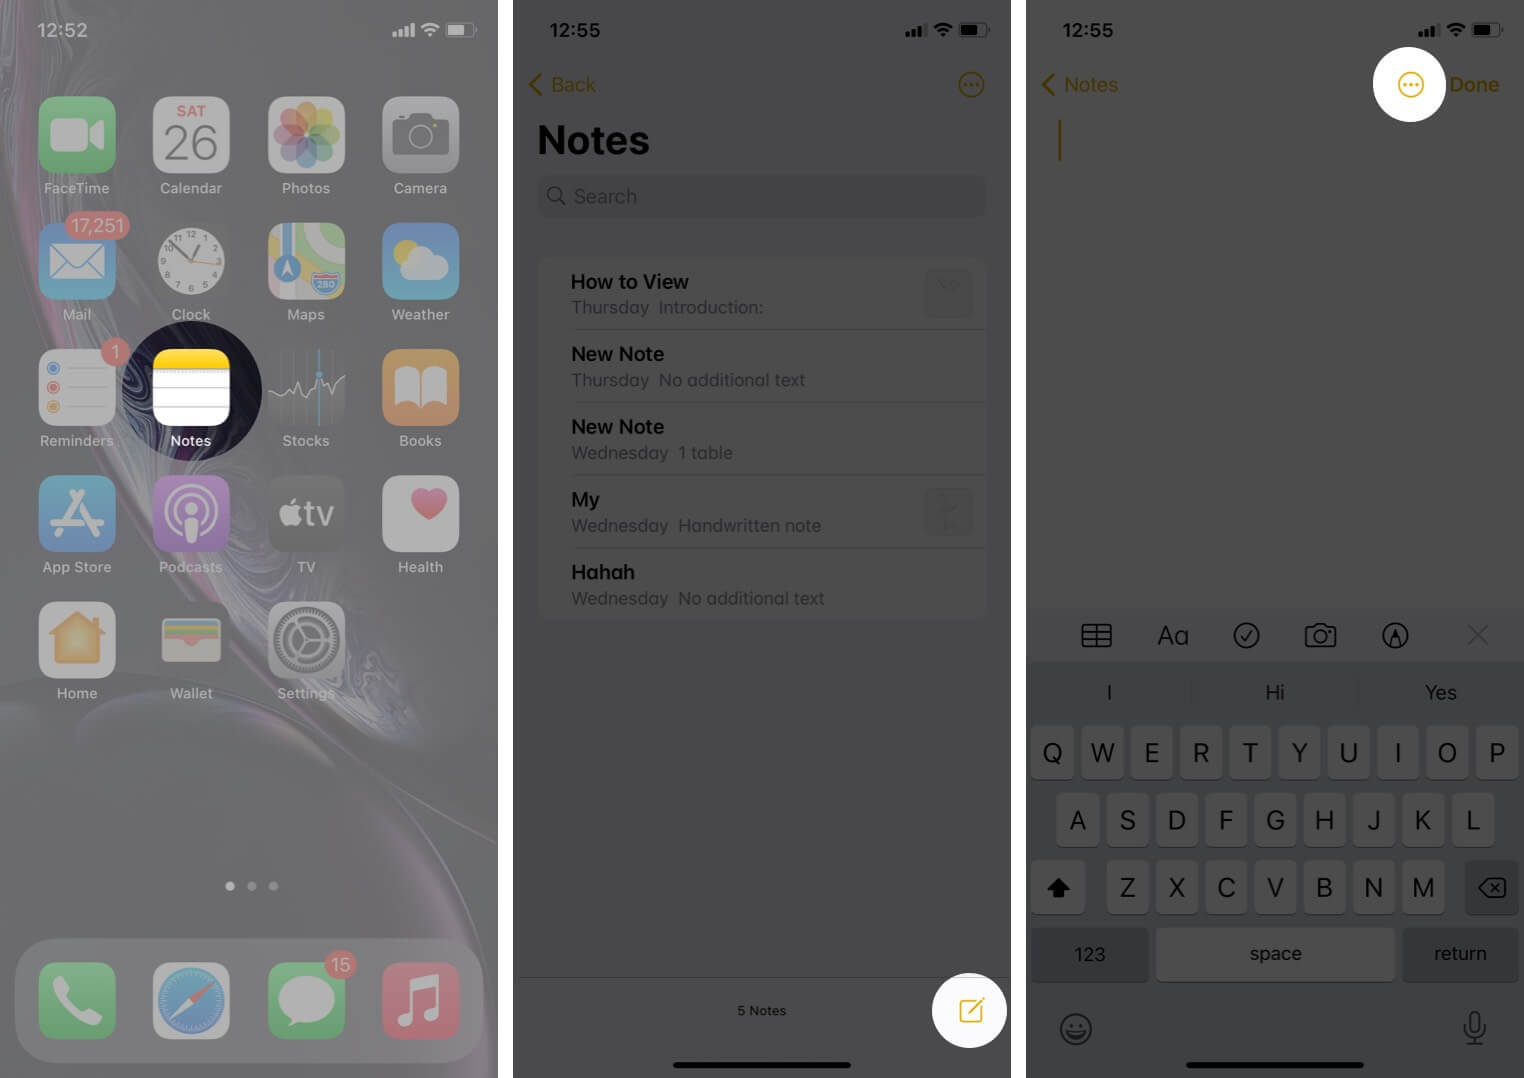 open notes app tap on create note and then tap on three dots icon on iphone